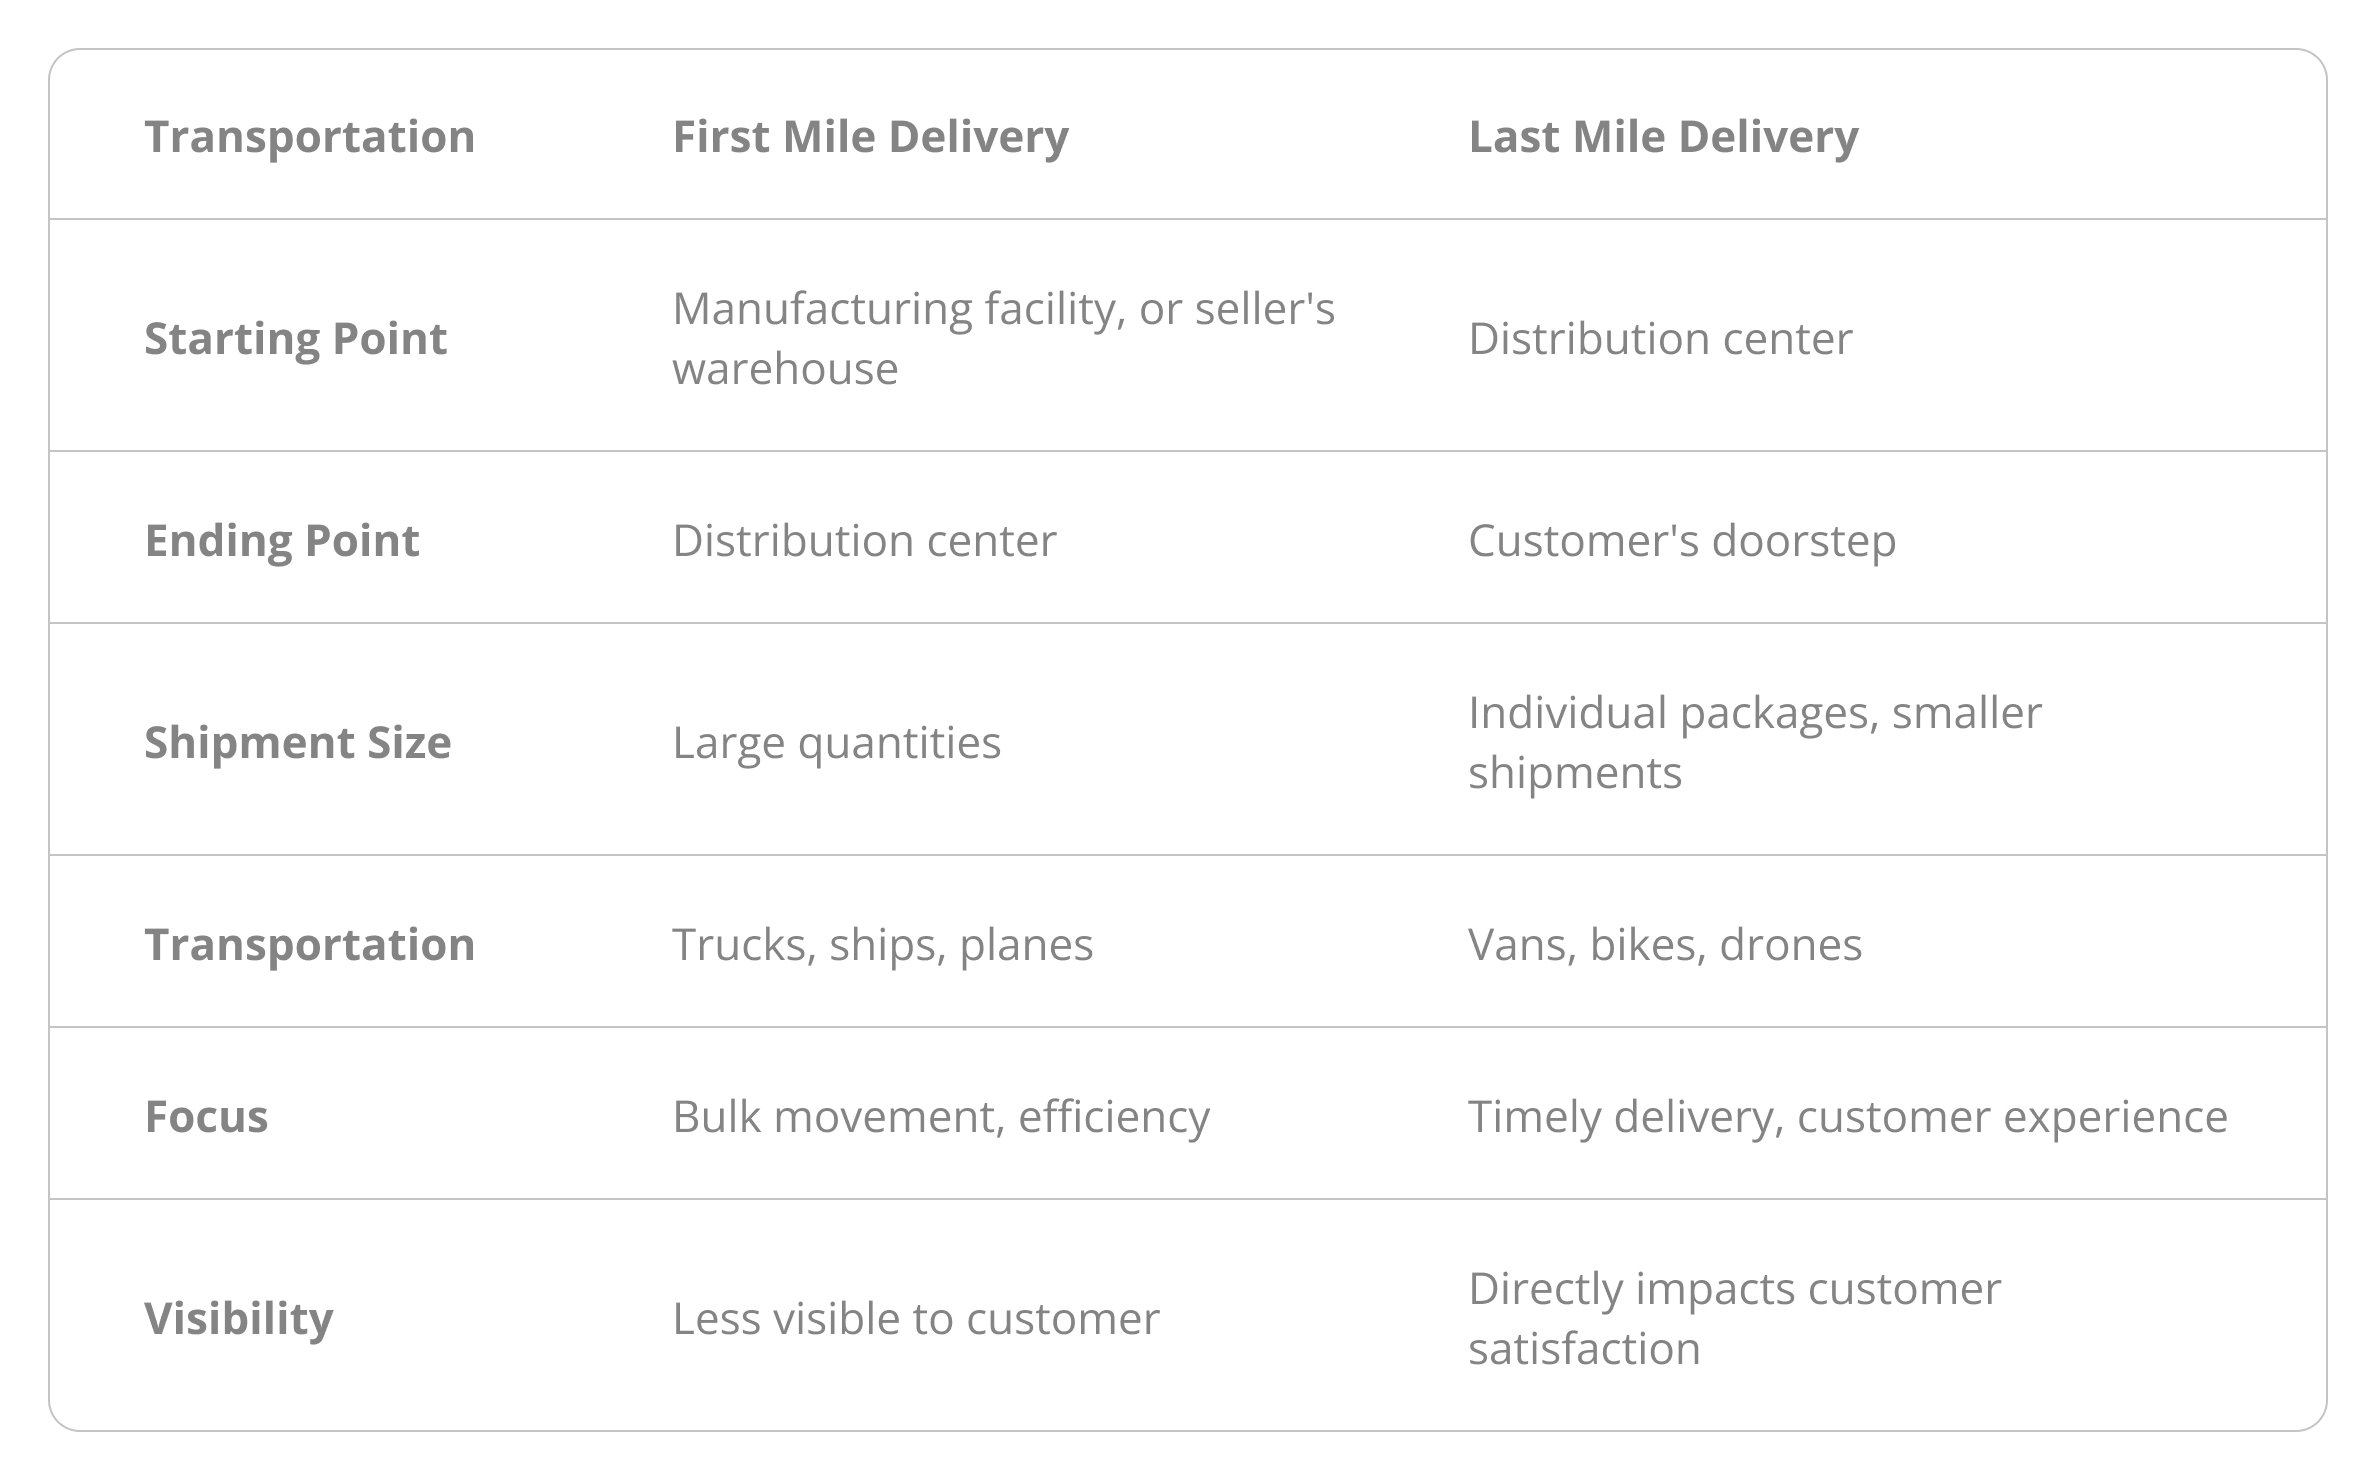 Table outlining the differences between first mile and last mile delivery